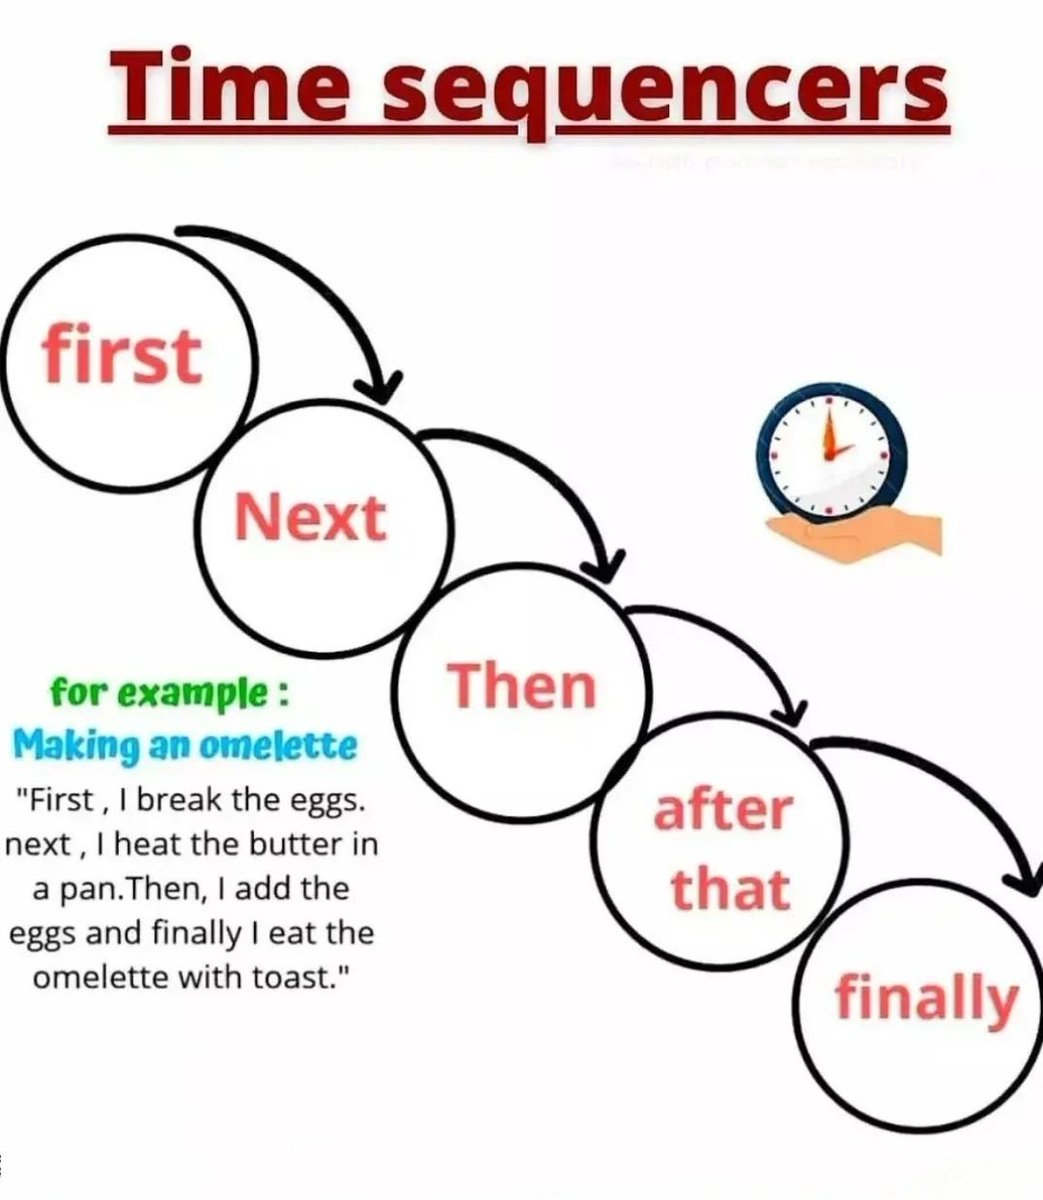 Time sequencers.